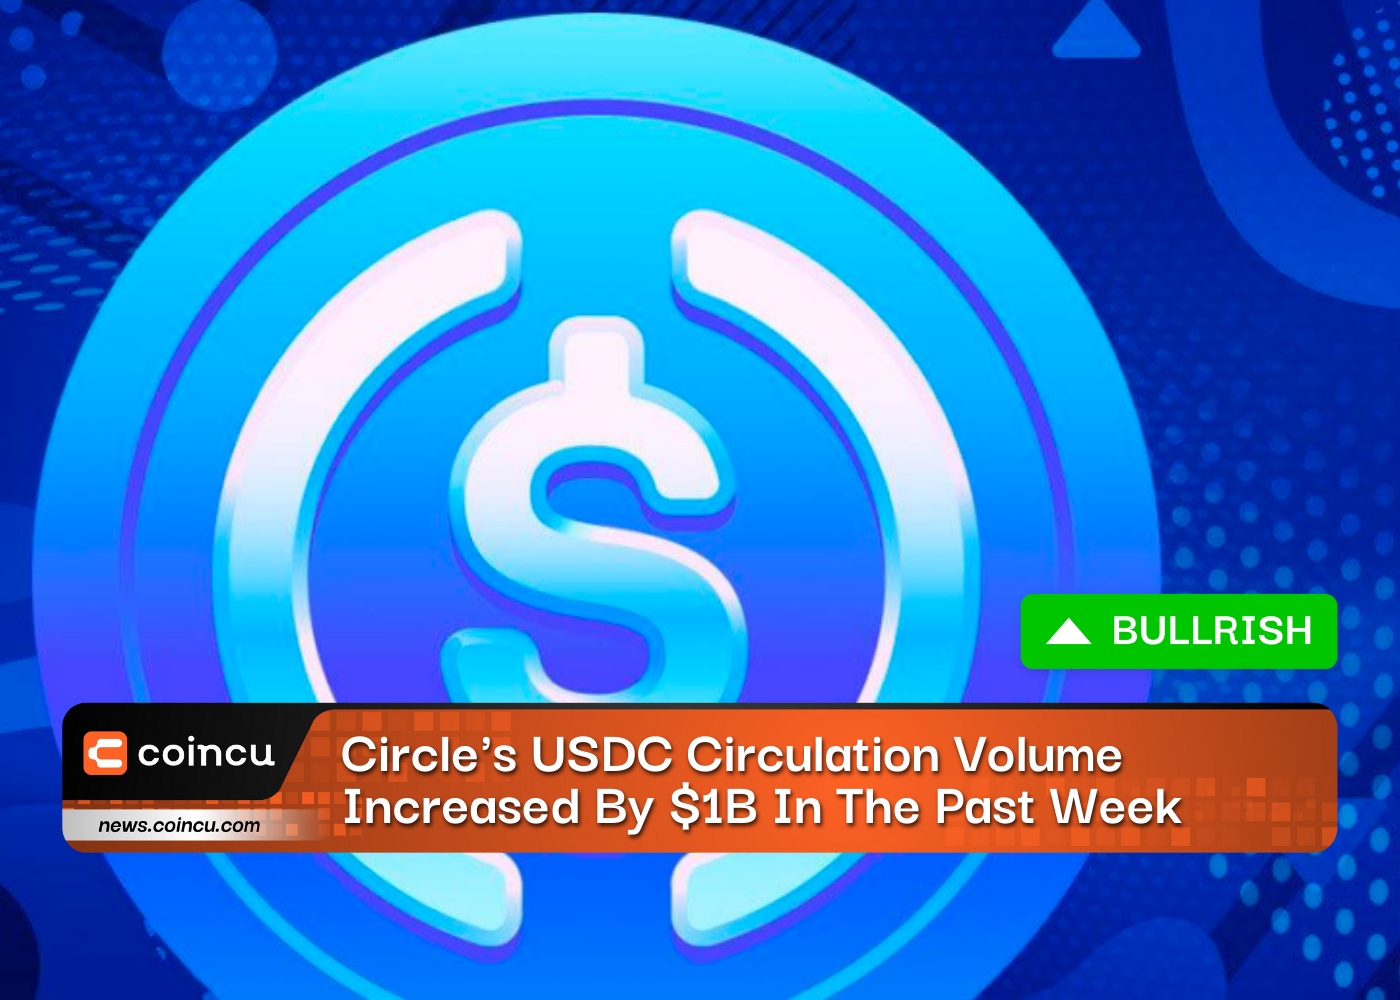 Circle's USDC Circulation Volume Increased By $1B In The Past Week